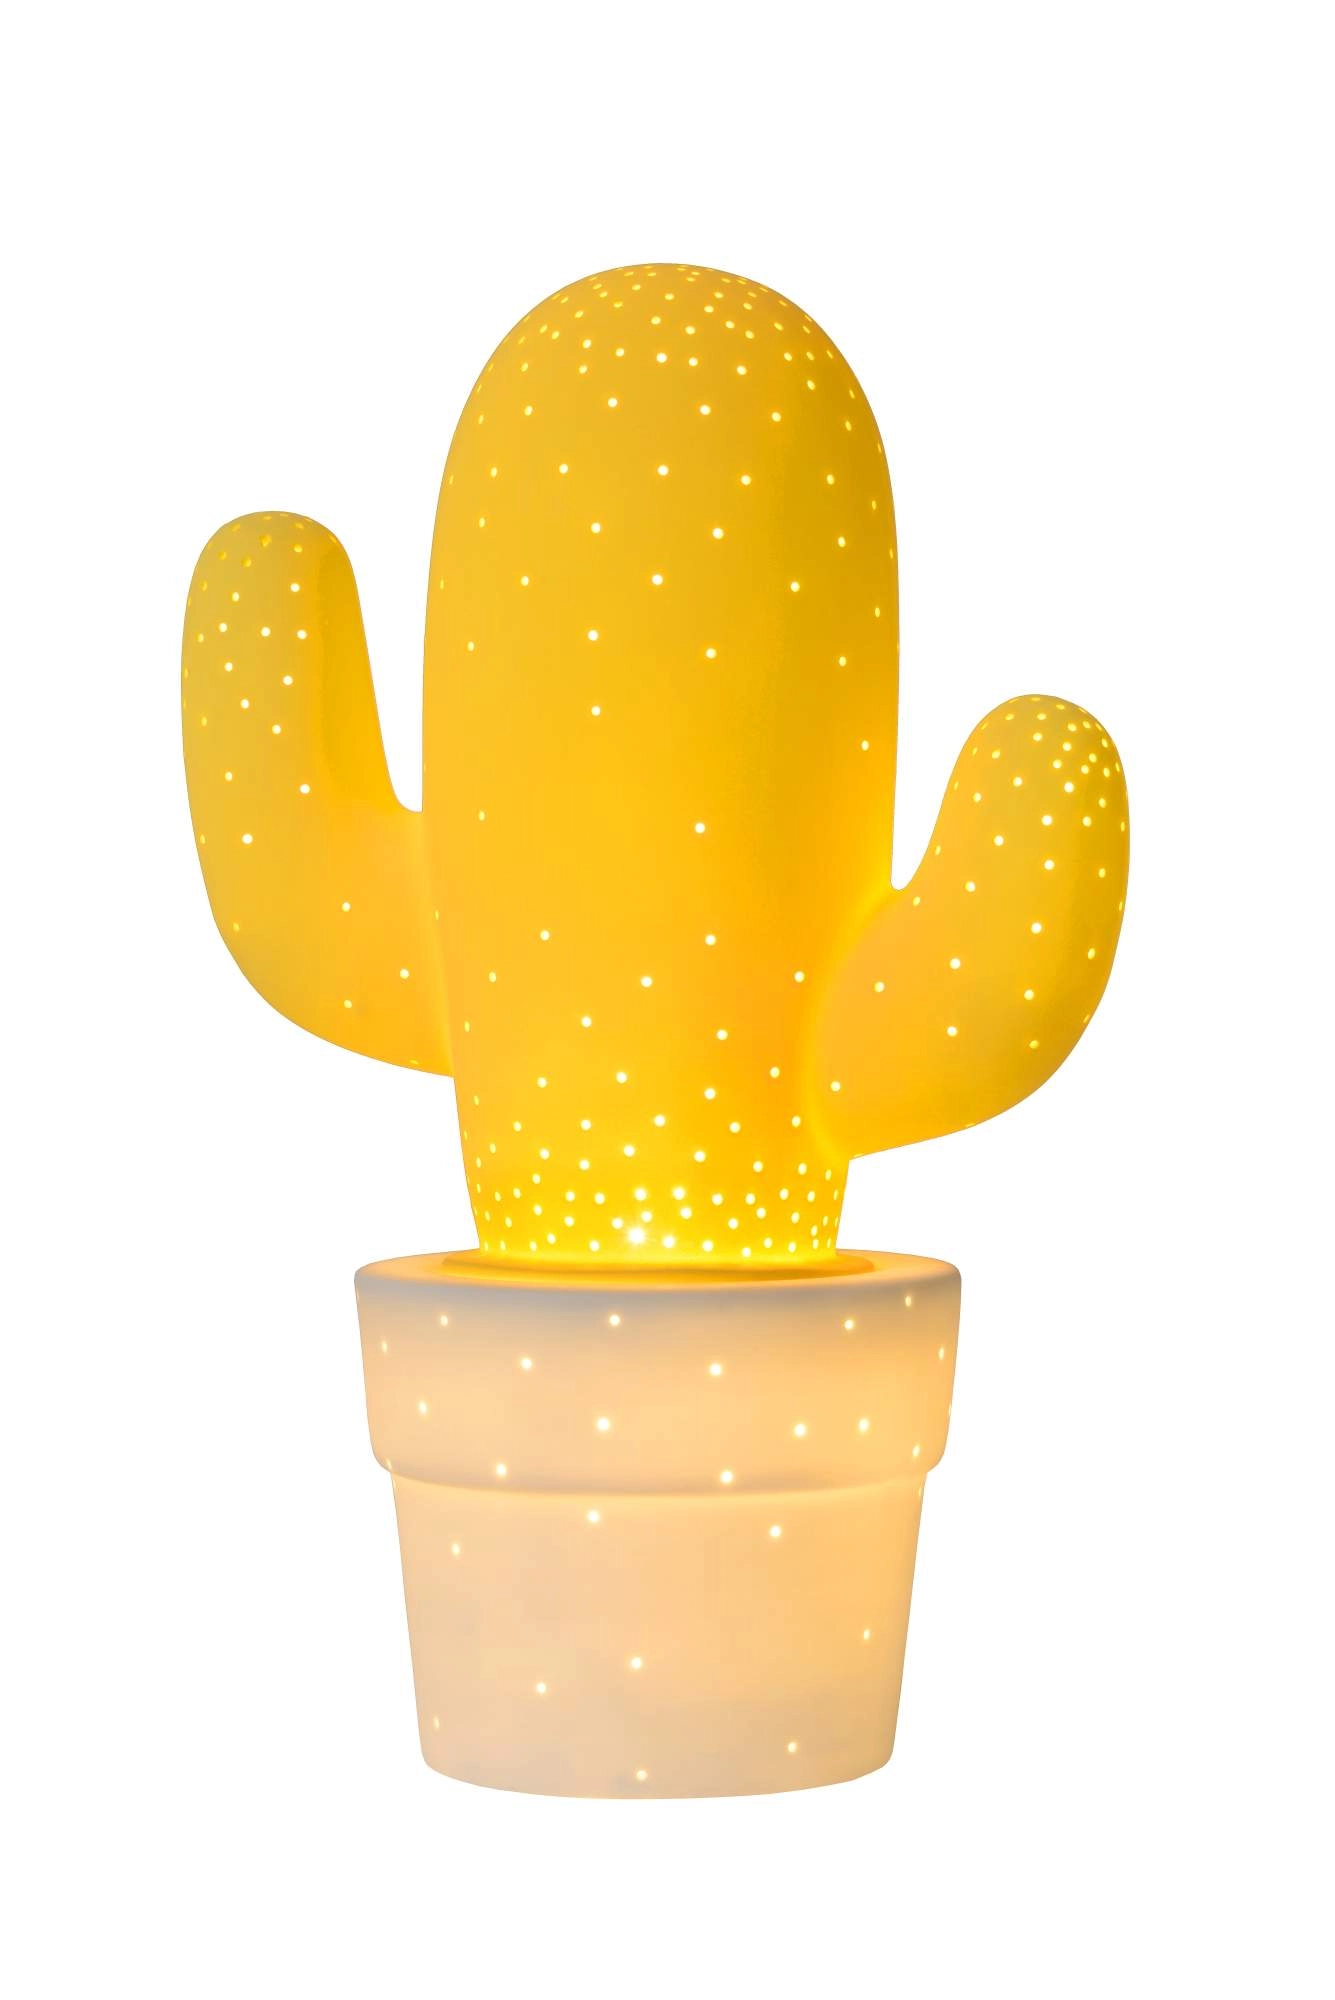 LU 13513/01/34 Lucide CACTUS - Table lamp - 1xE14 - Yellow